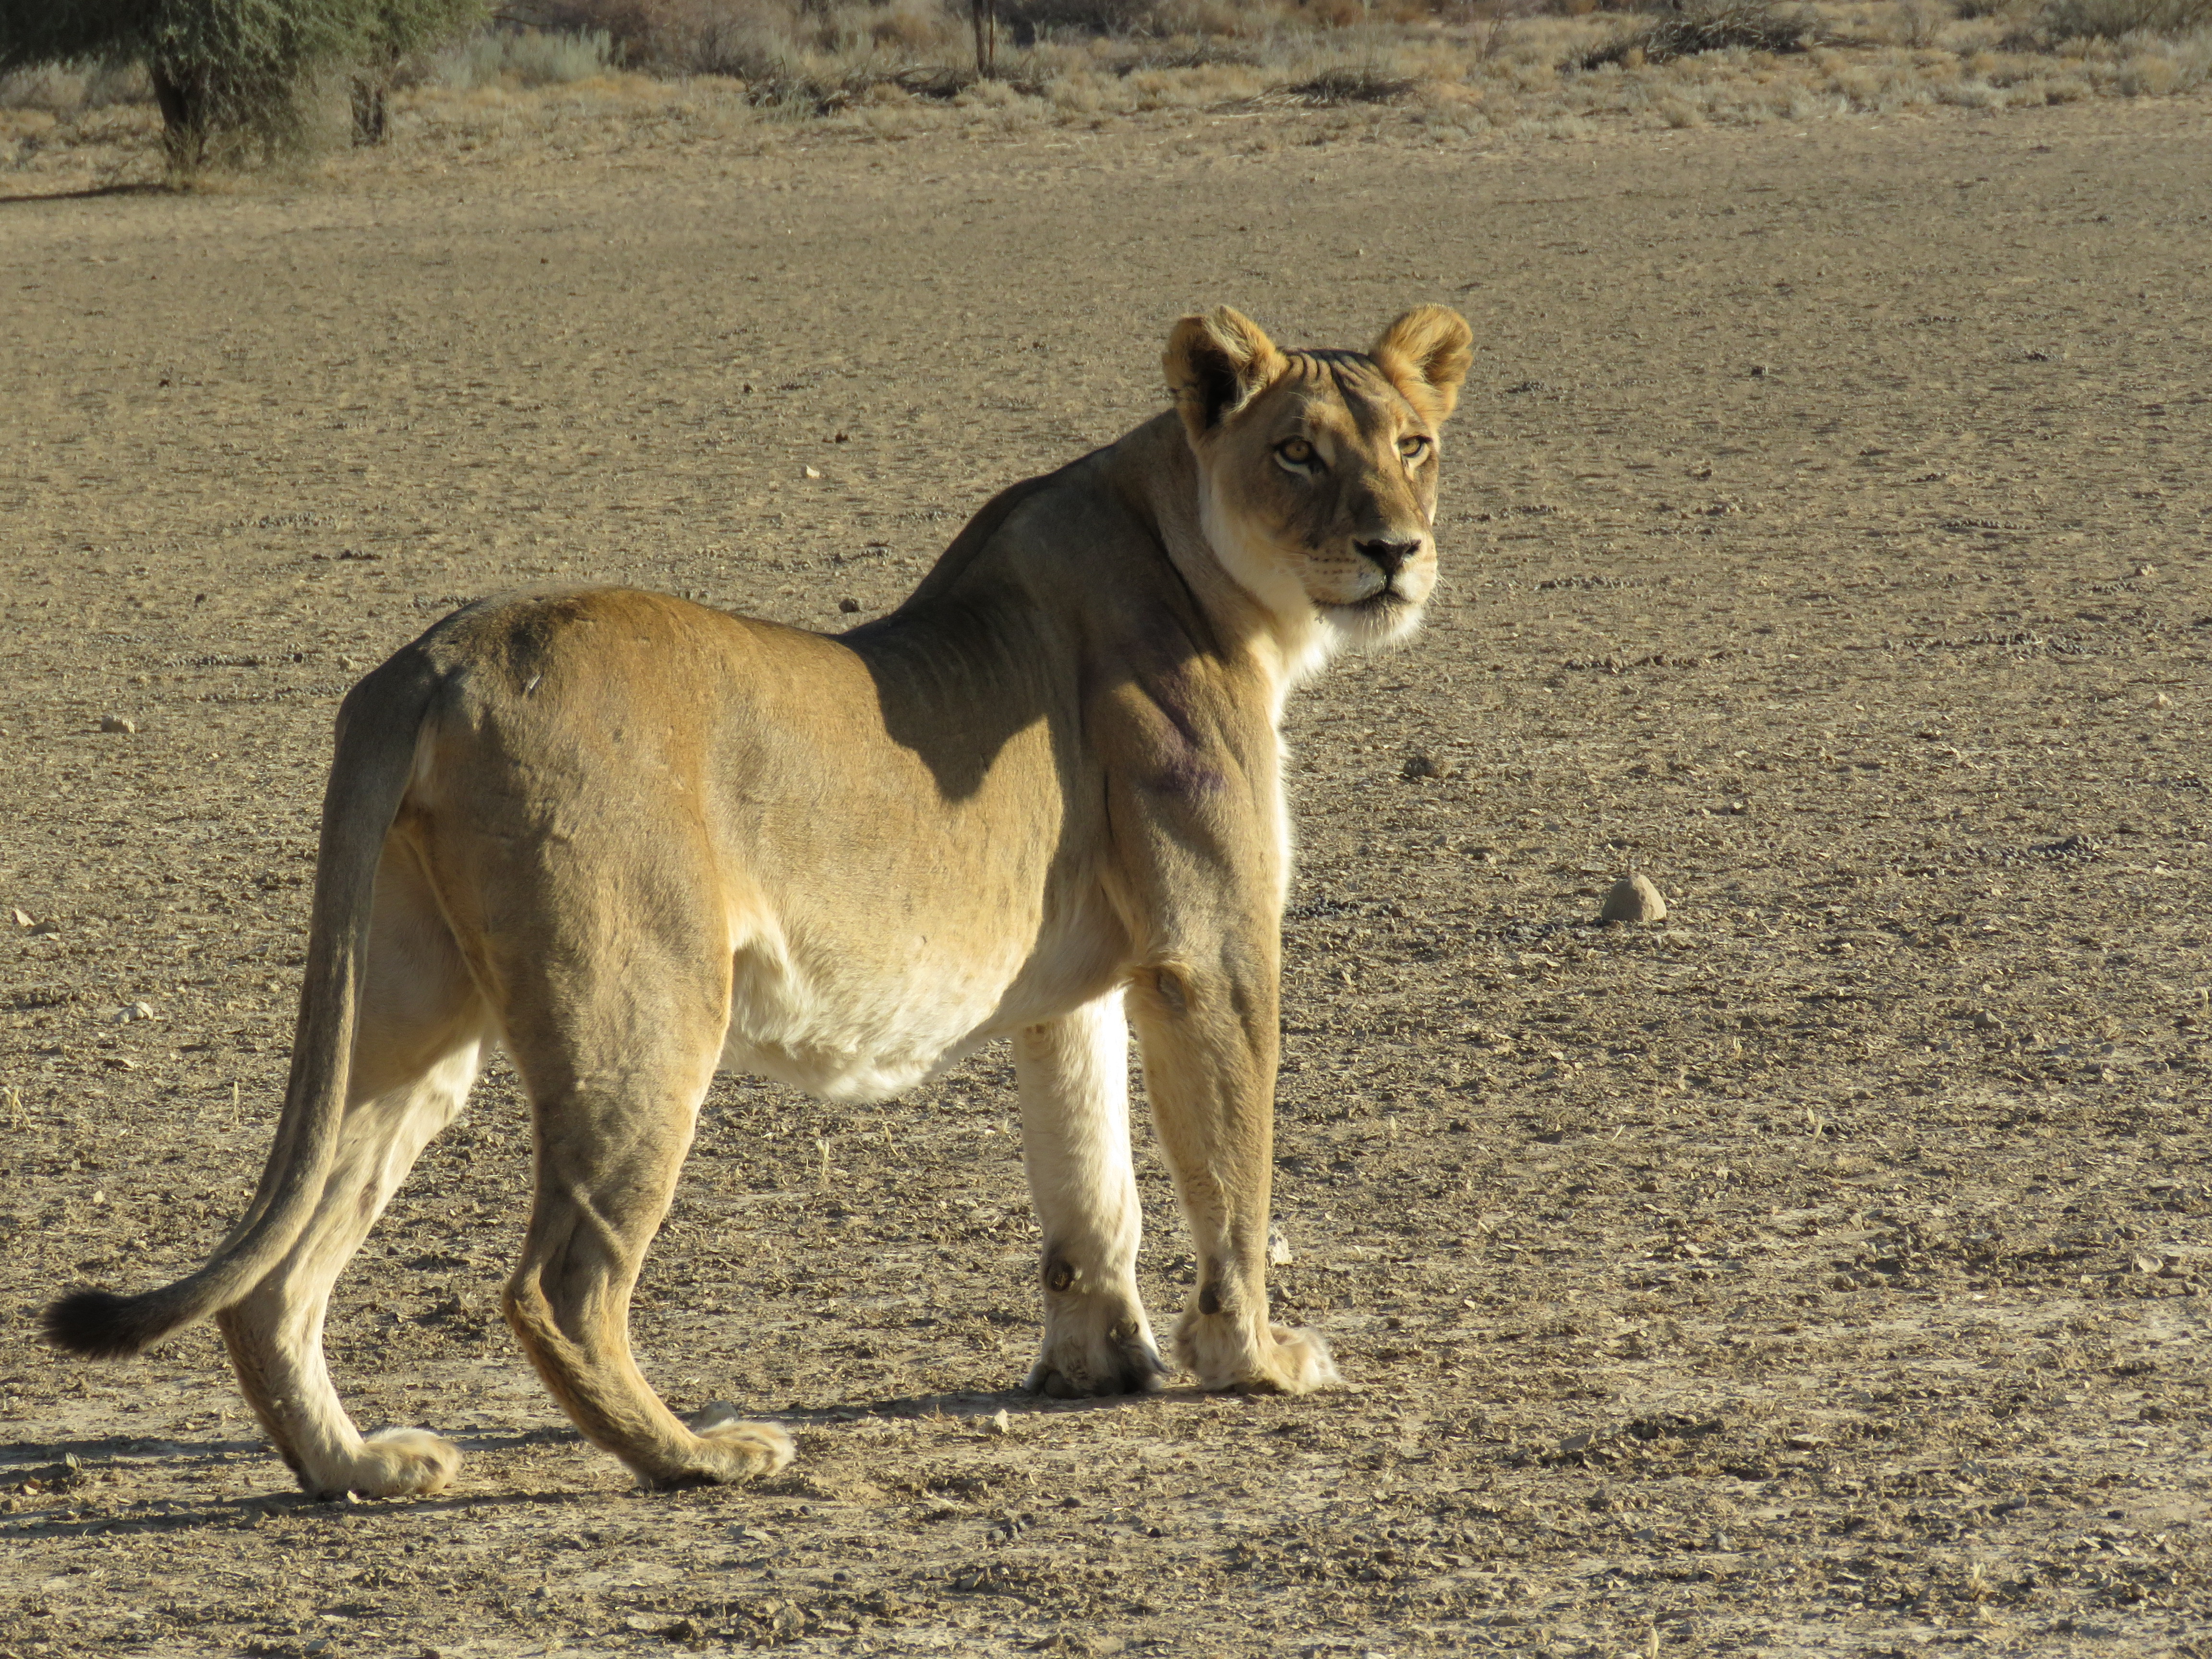 Female lion in the Kgalagadi - hb | SASAS | South African Society ...